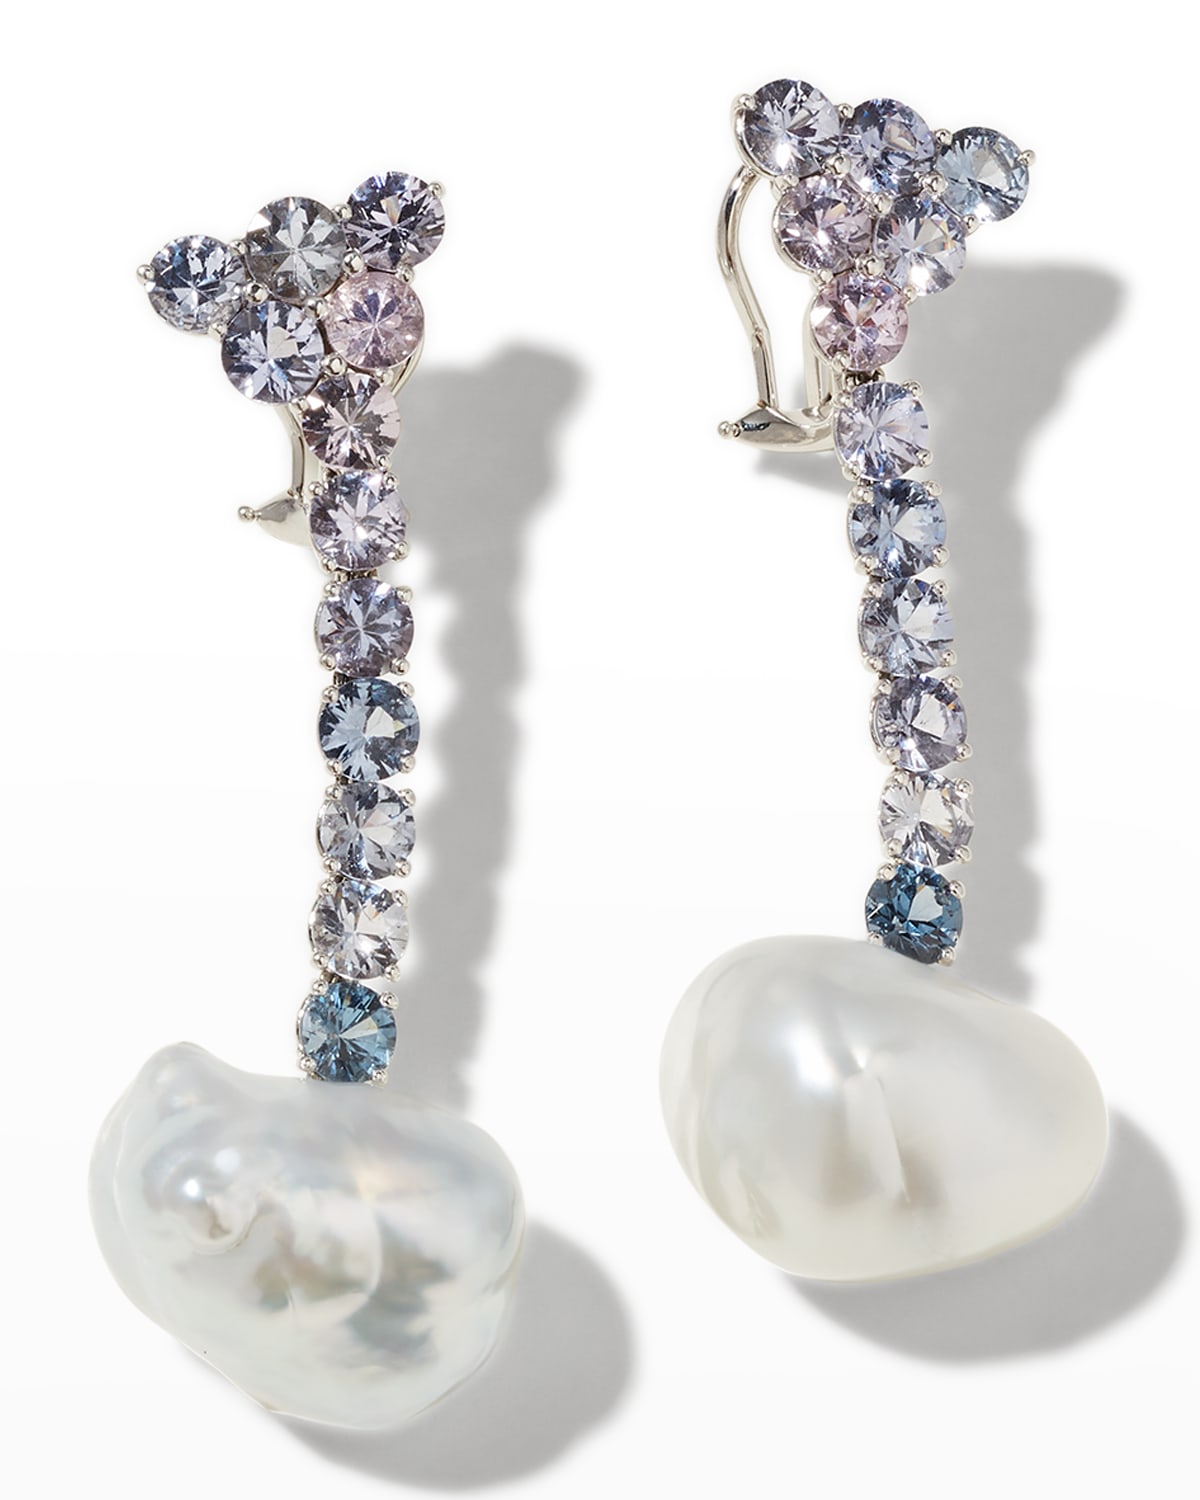 Assael White Gold 14.3x22.91mm Baroque Pearl Earrings With Lavender Spinel